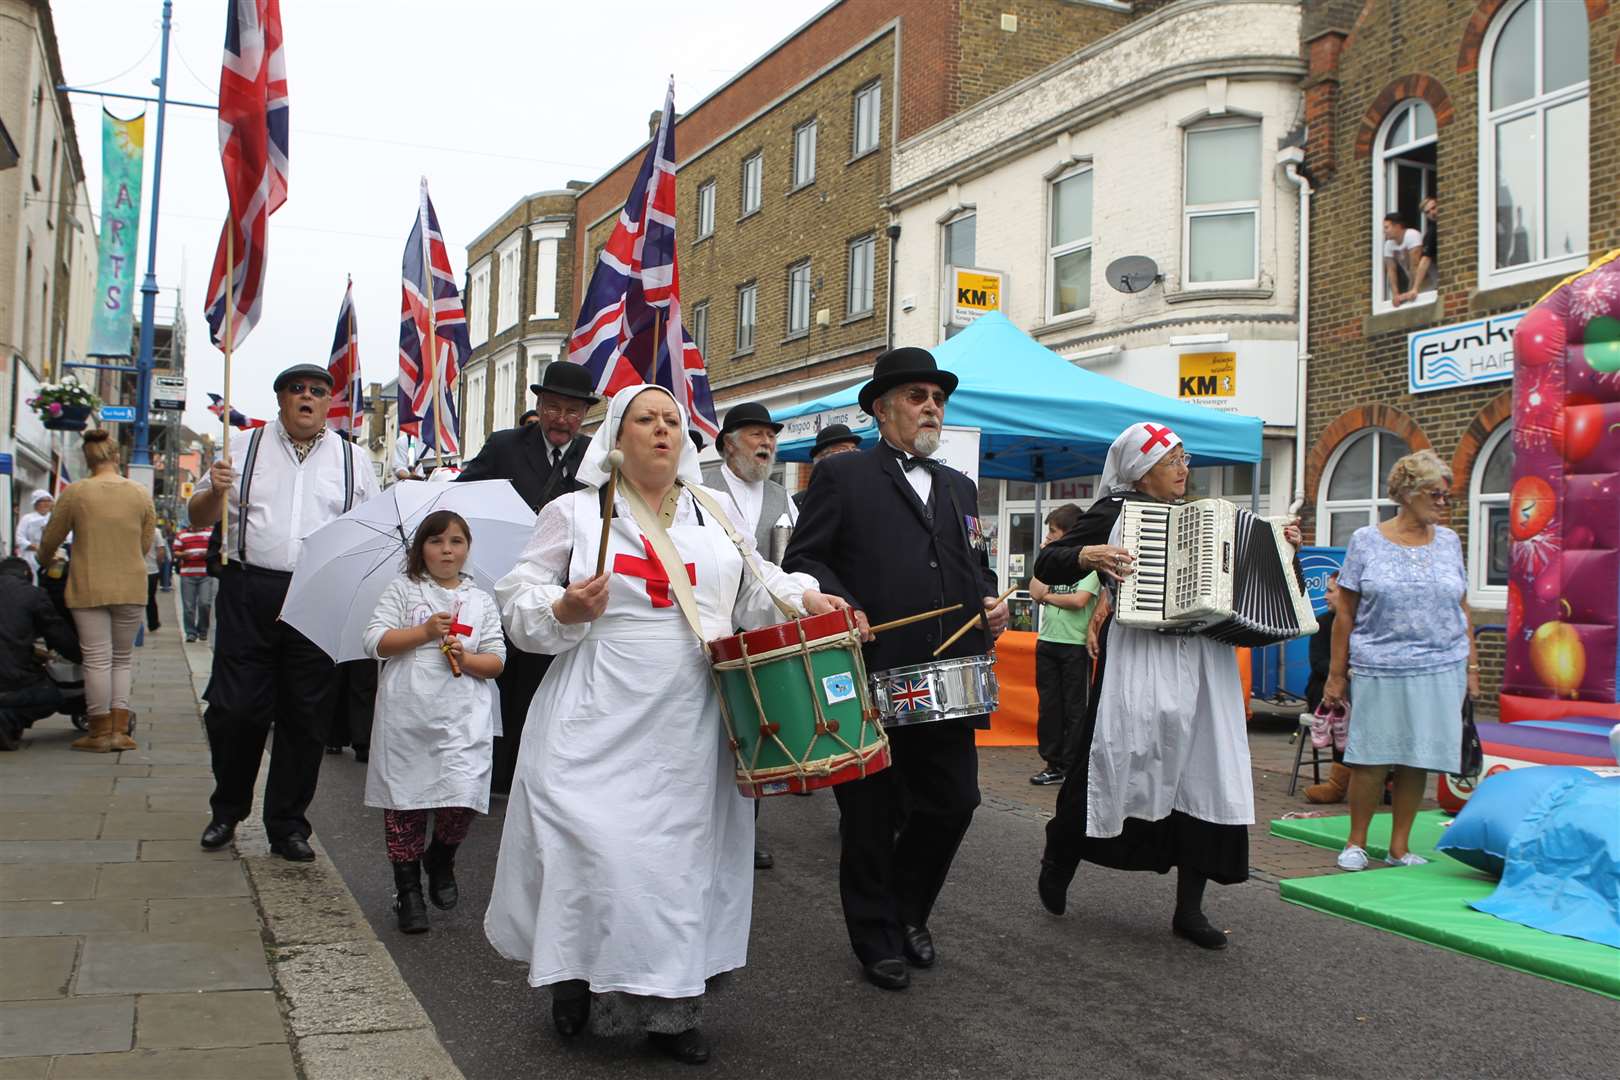 People dressed up at a reenactment of a First World War Parade during last year's Sheppey Promenade Festival